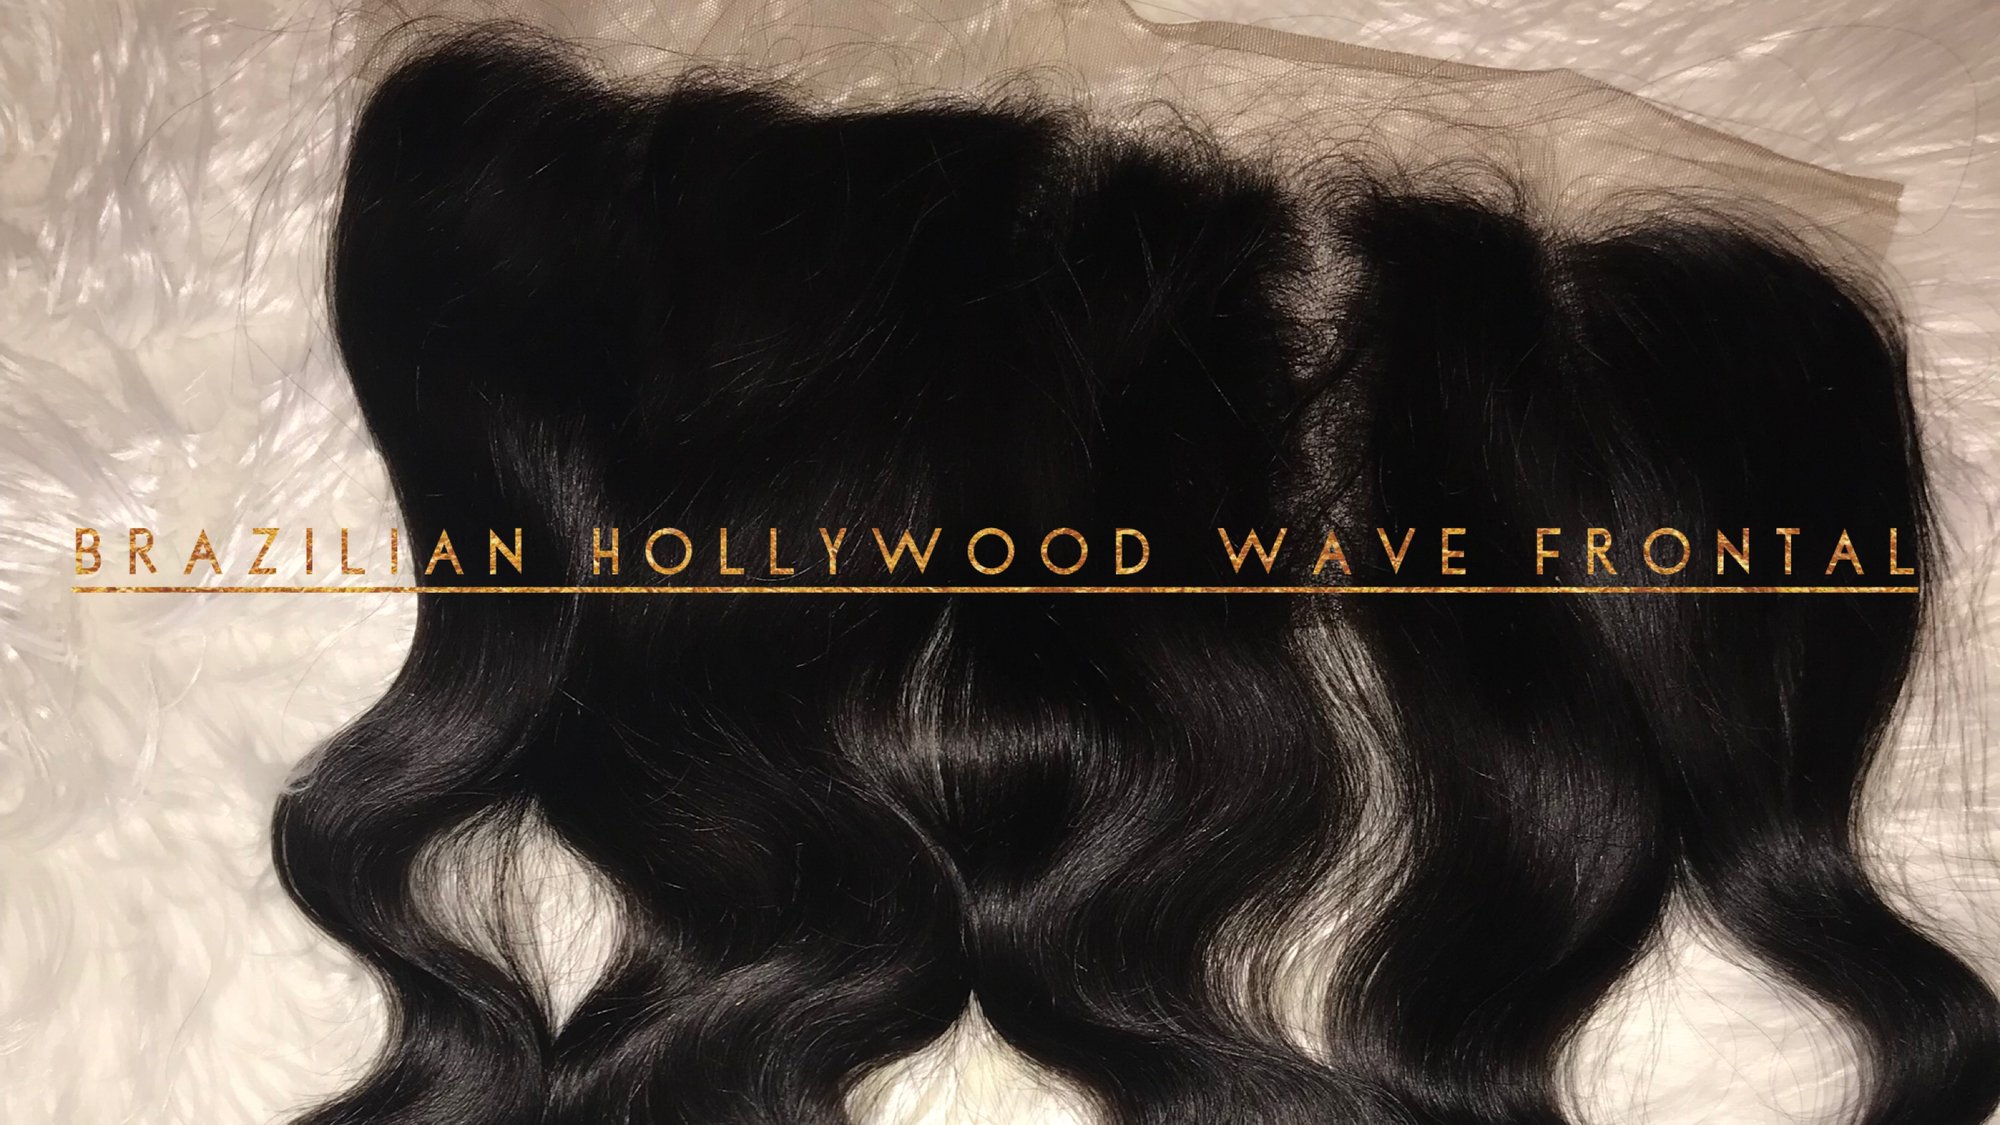 Image of Brazilian Hollywood Wave Frontal